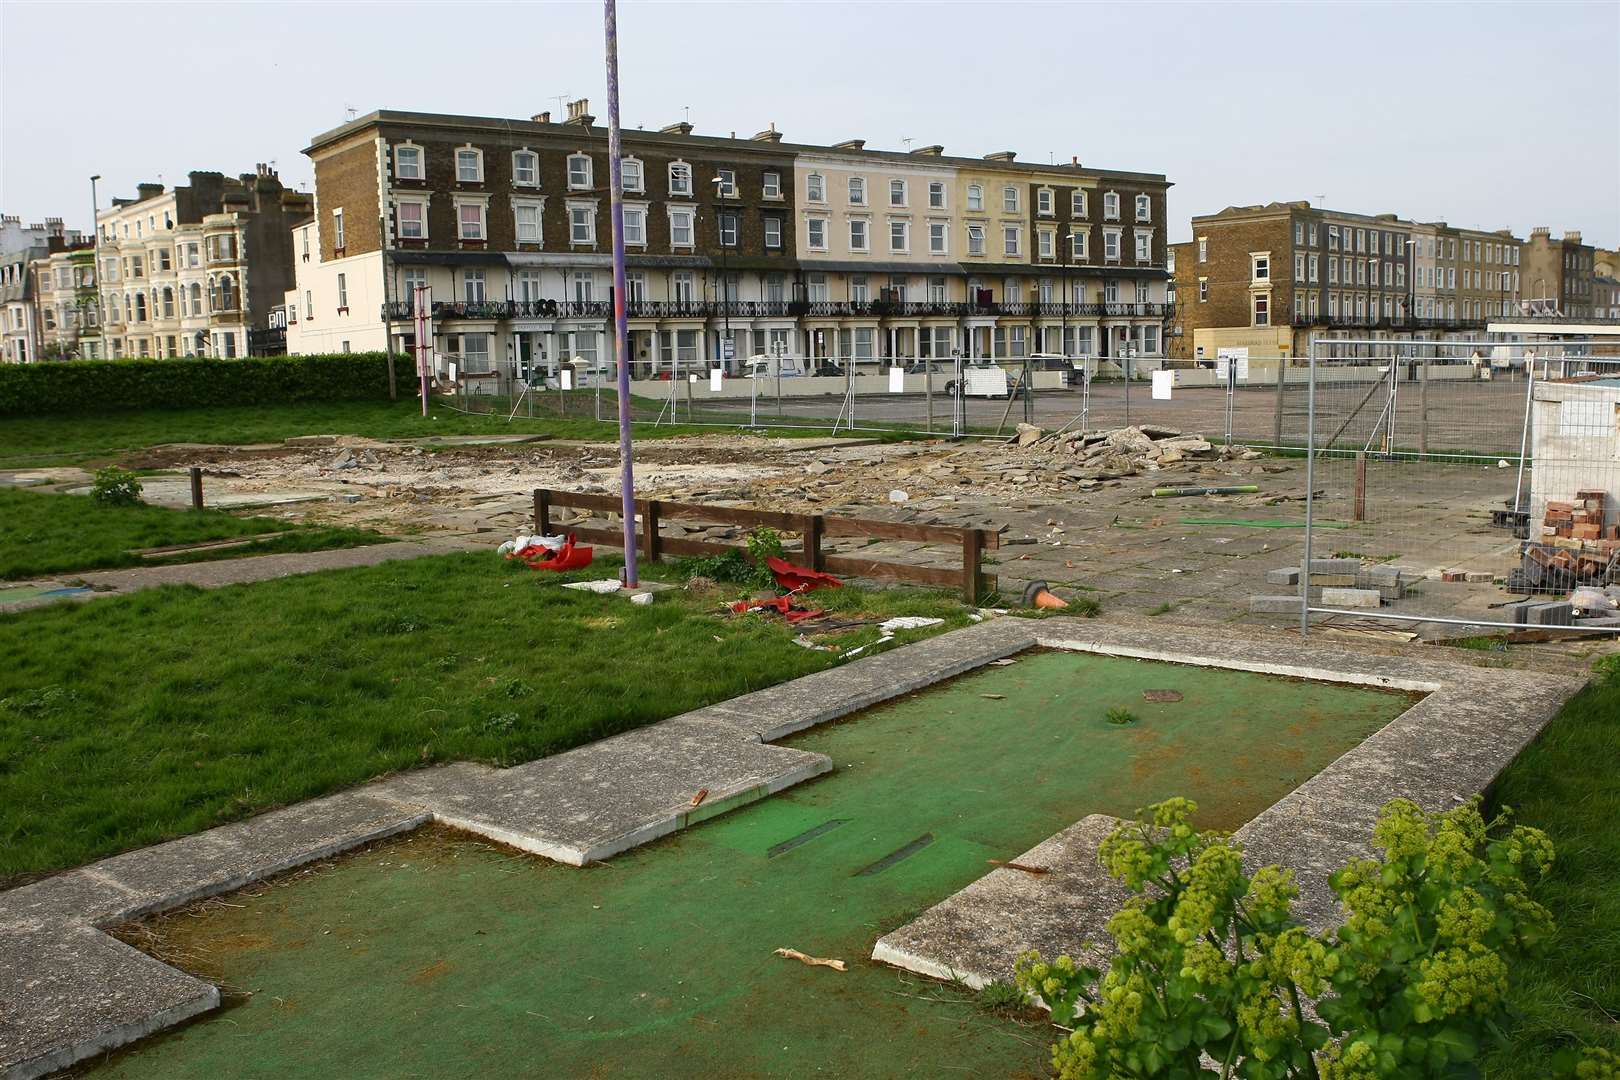 Ethelbert Terrace, Cliftonville, pictured here in 2014 following the demolition of the DIY skatepark. Picture: Matt Bristow